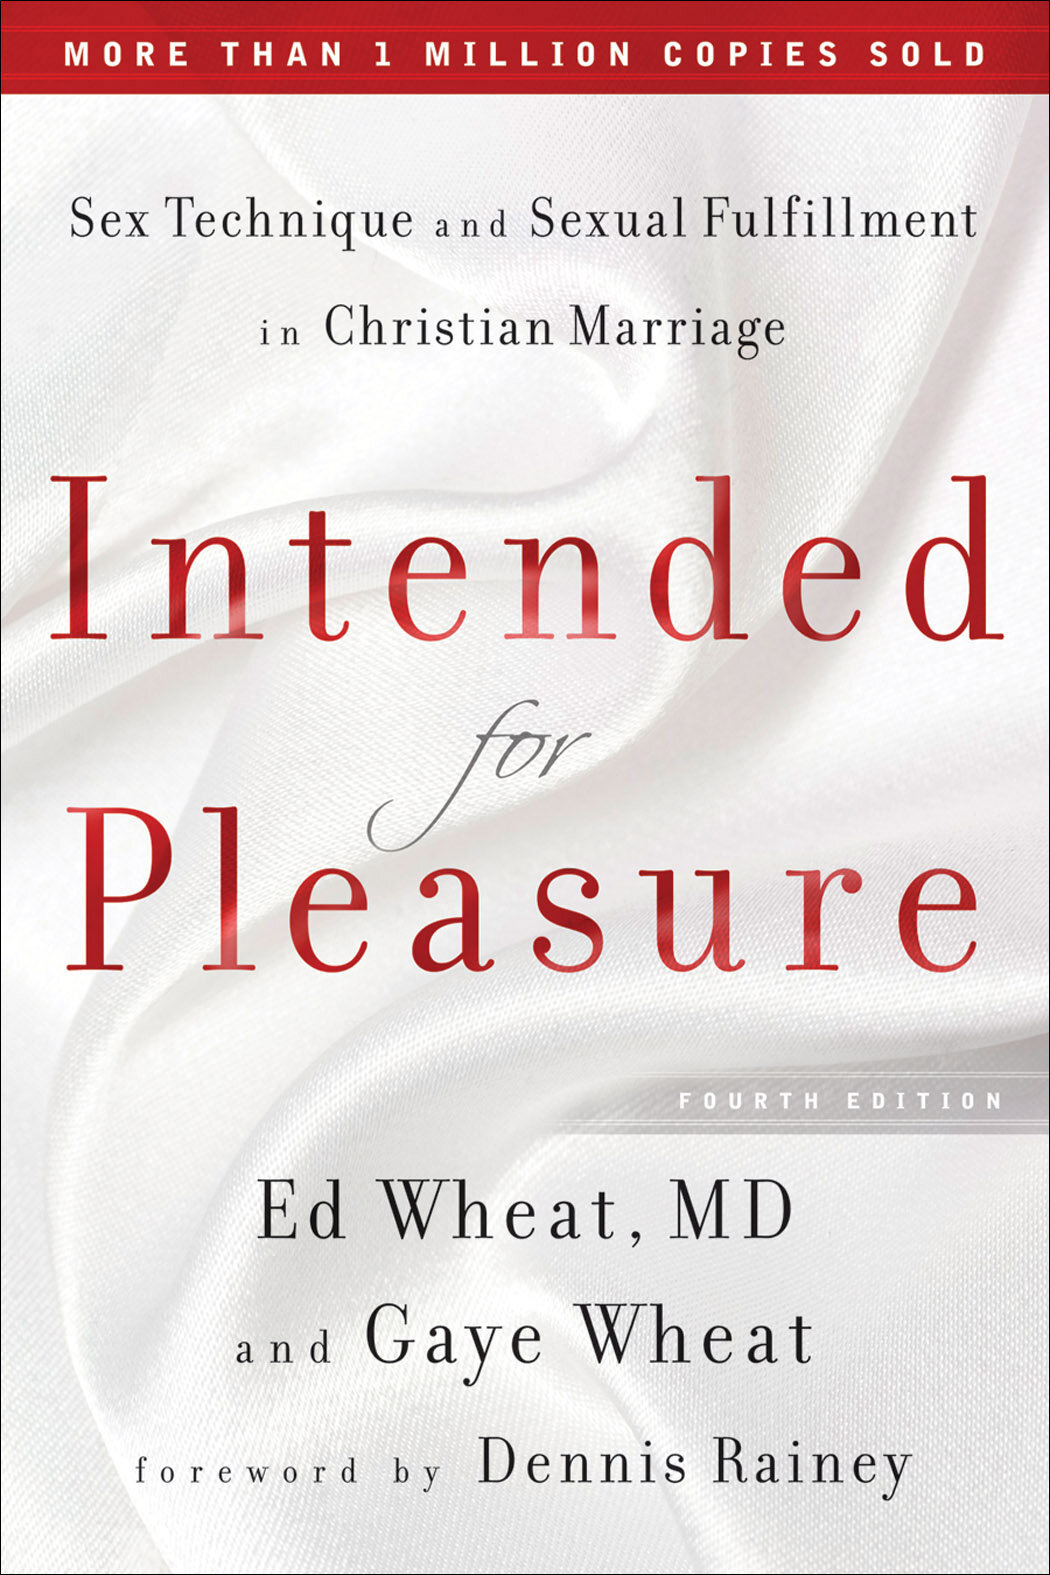 Intended For Pleasure Sex Technique And Sexual Fulfillment In Christian Marriage Logos Bible 